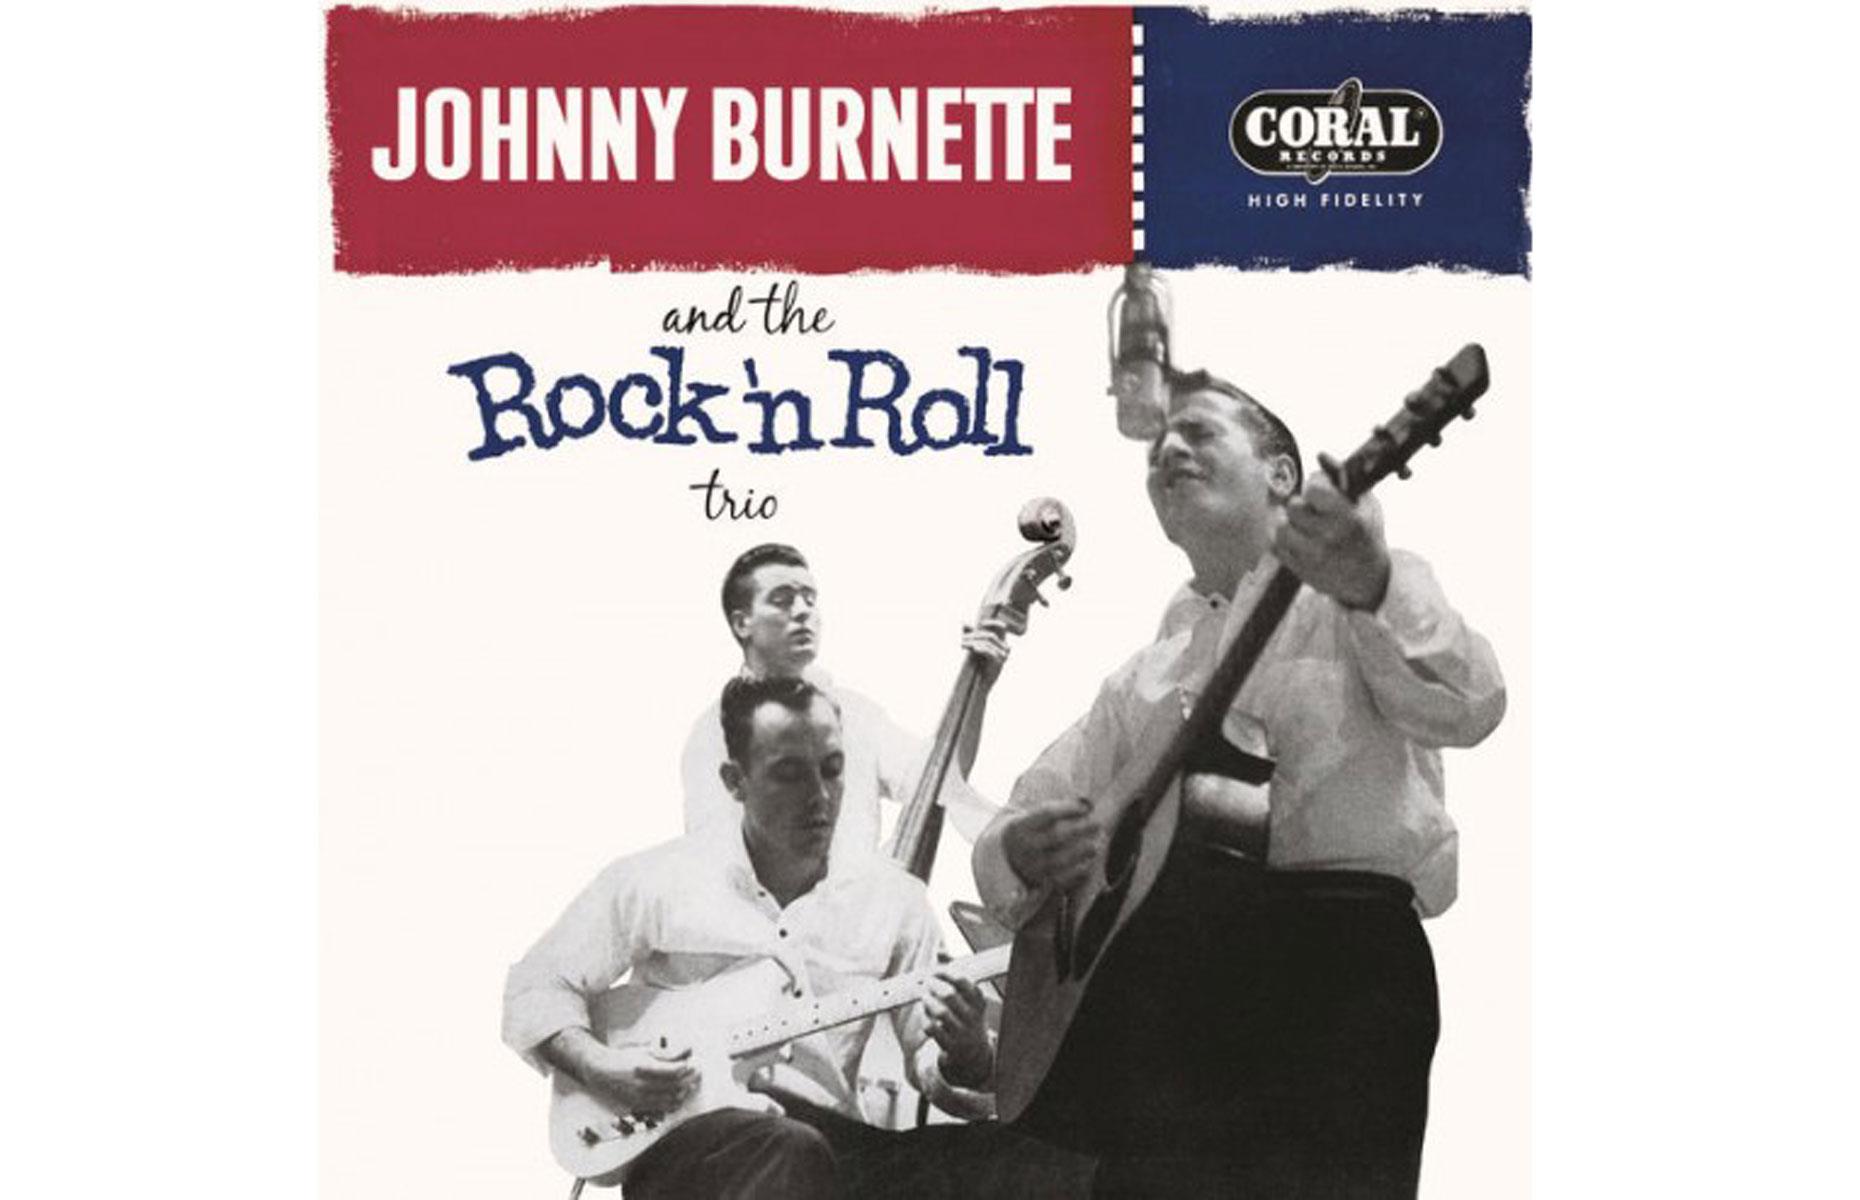 Johnny Burnette and the Rock 'n Roll Trio: up to $1,882 (£1,600)